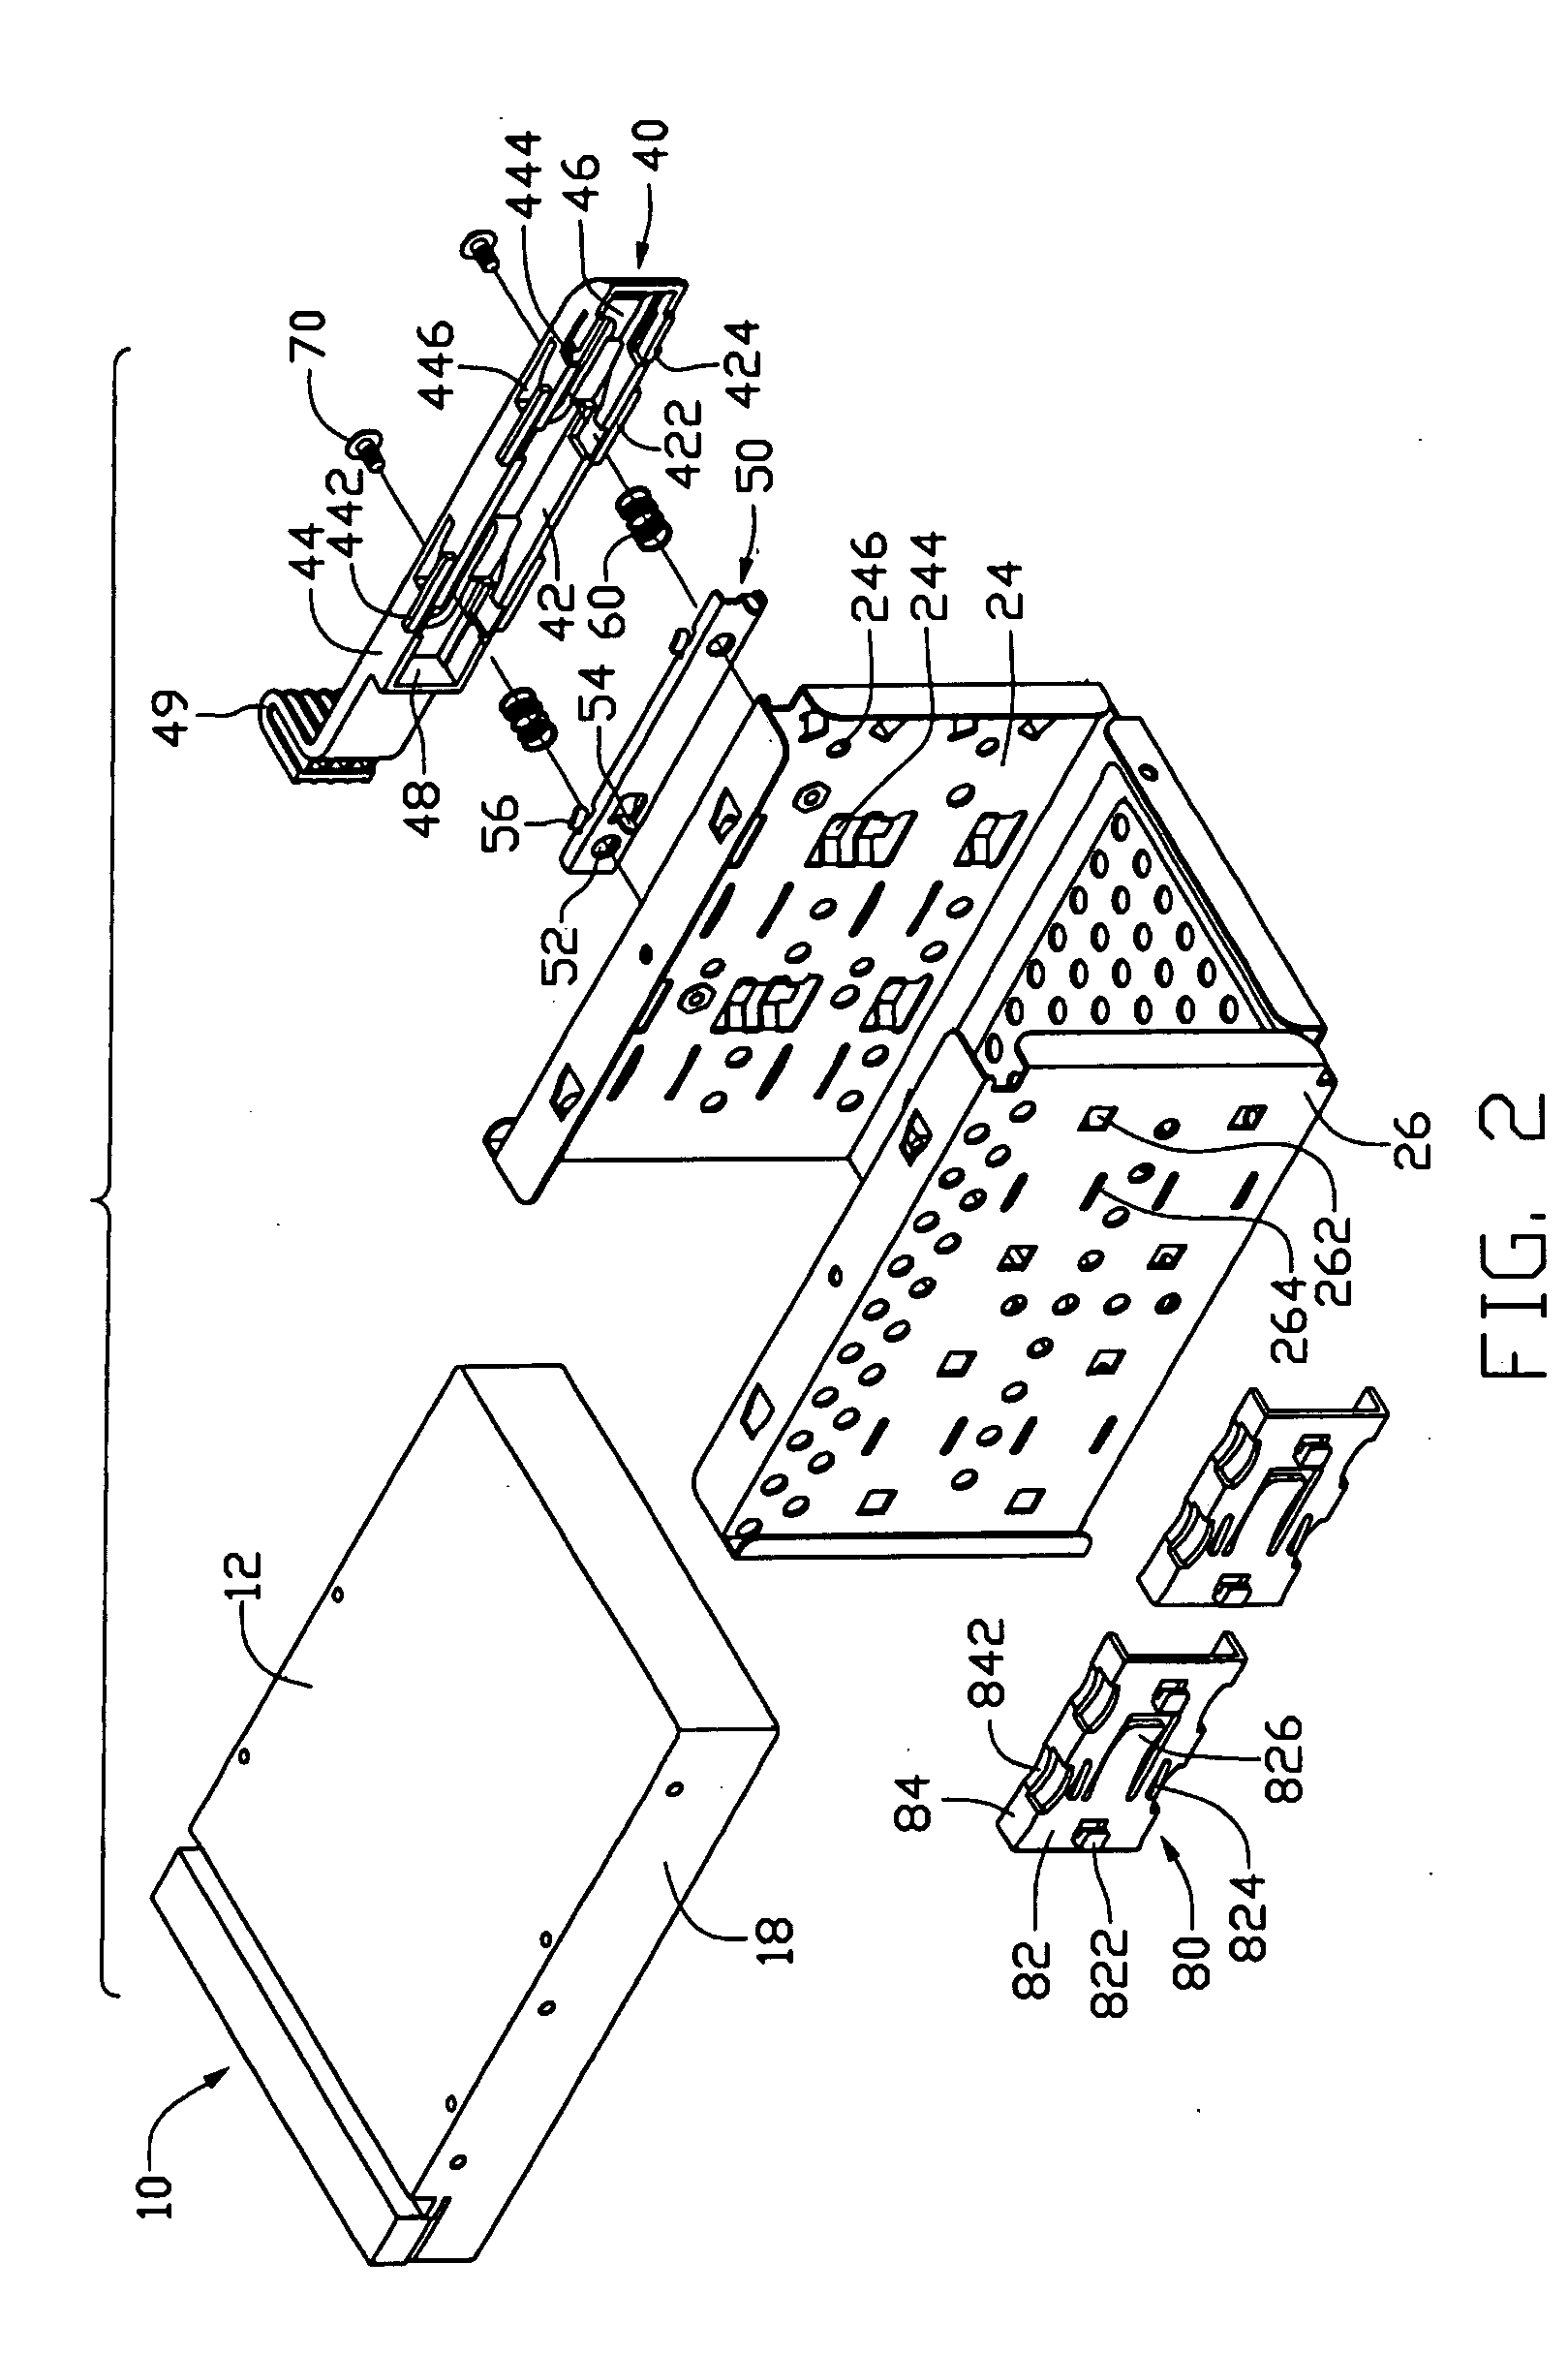 Mounting apparatus for storage device